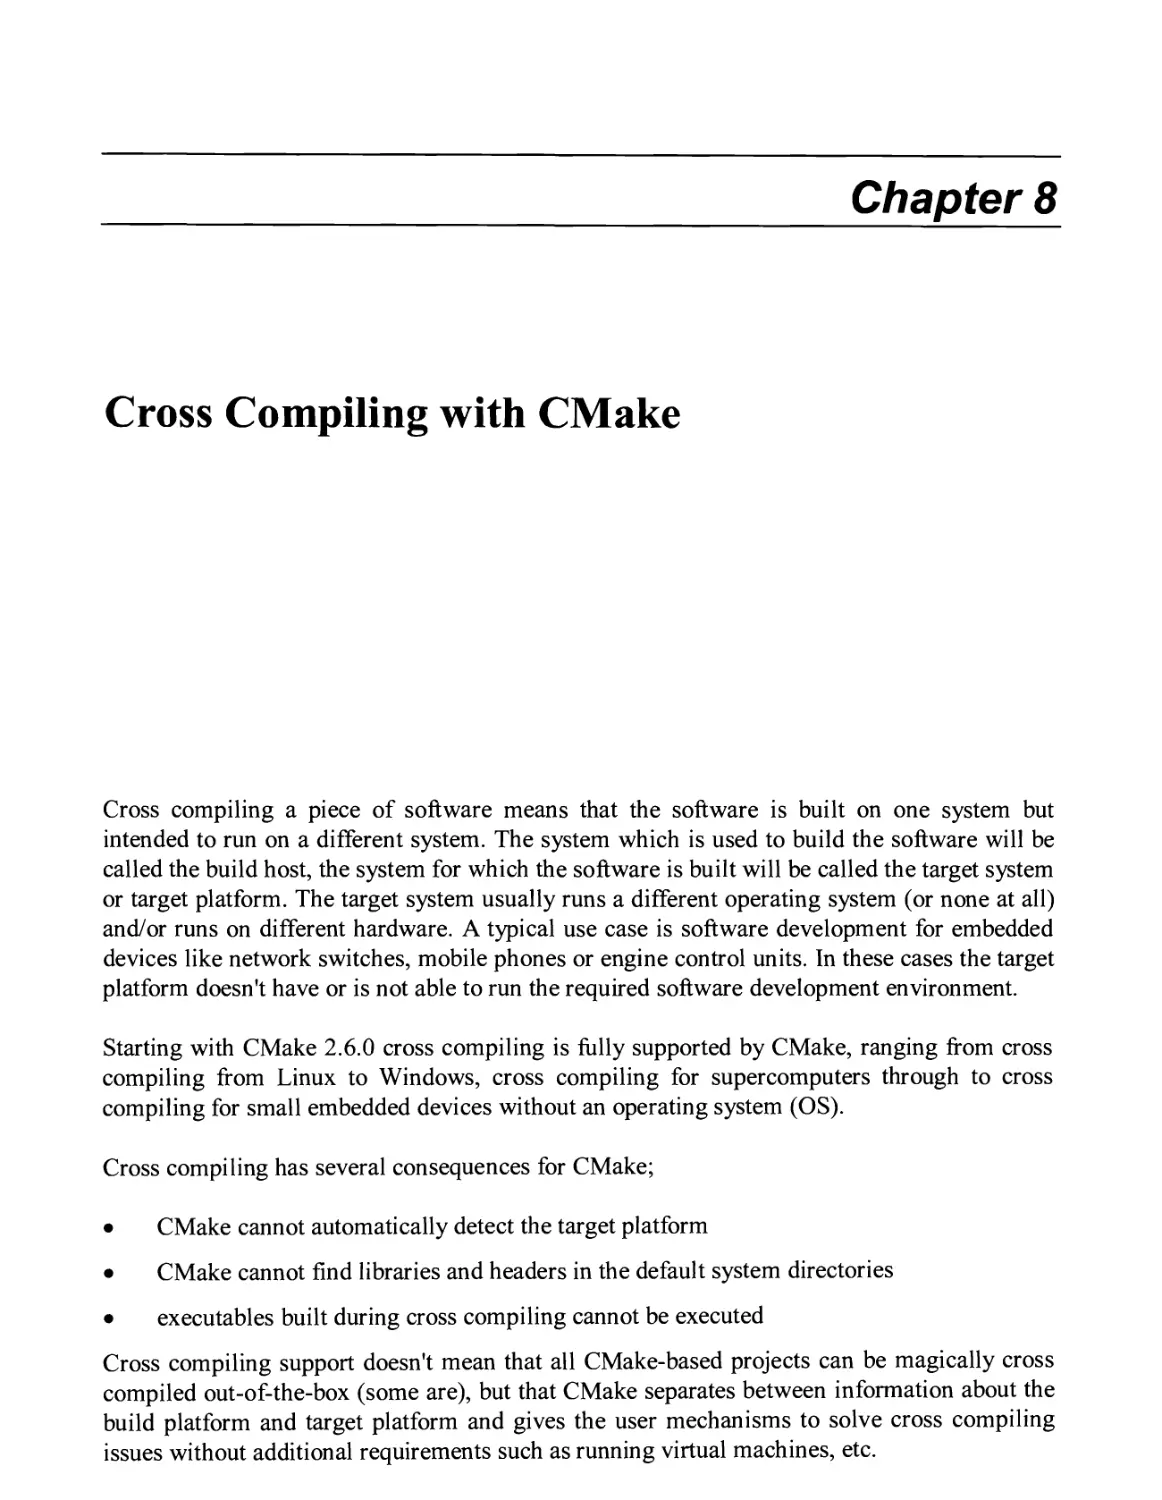 8. CROSS COMPILING WITH CMAKE